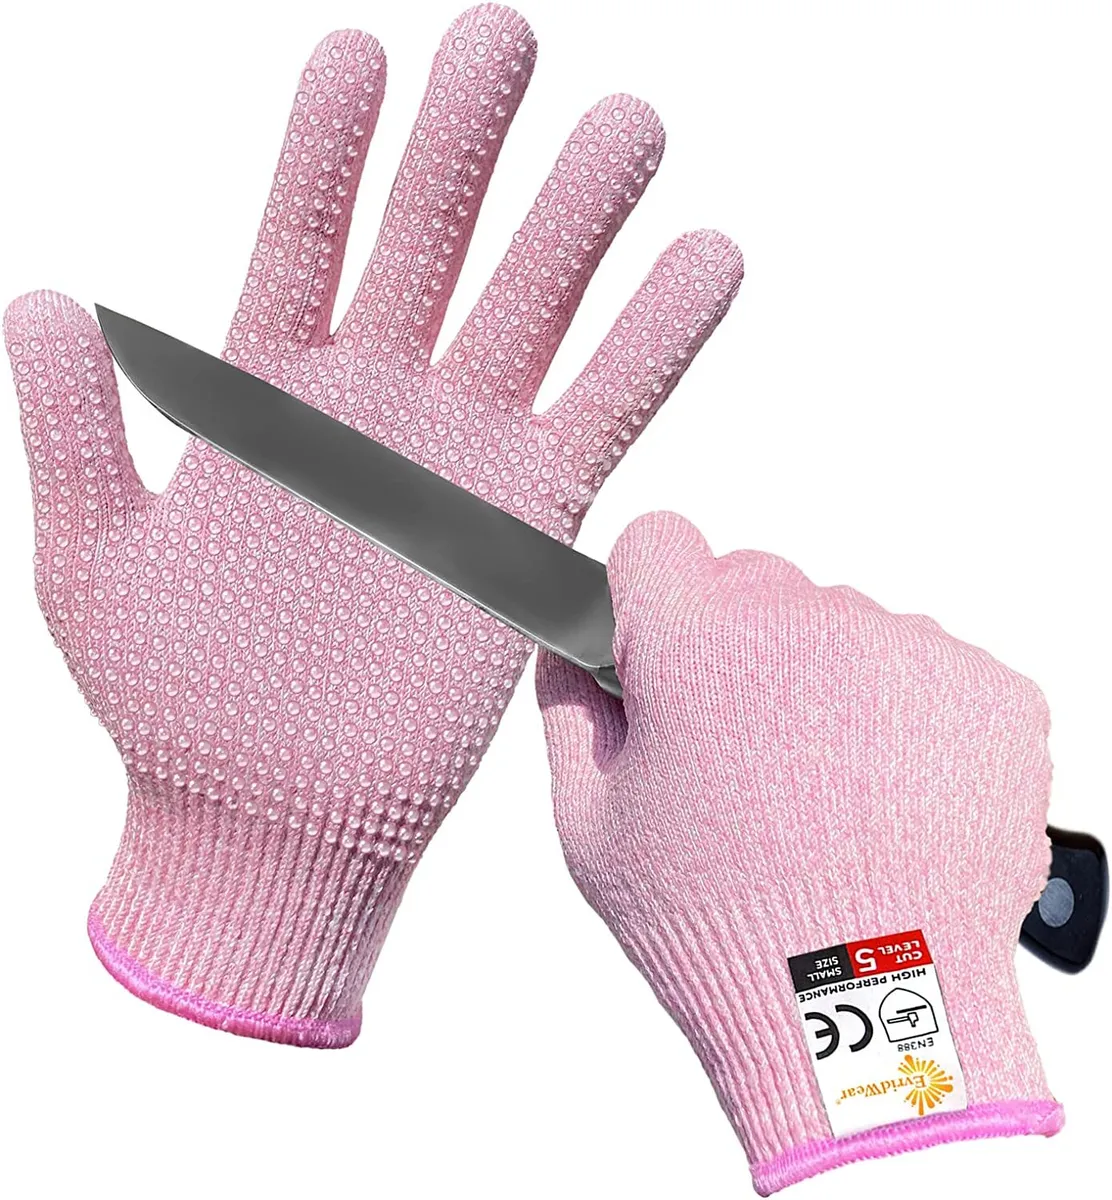 EvridWear Cut Resistant Work Gloves with Grip Dots, Food Grade Protective  Glove